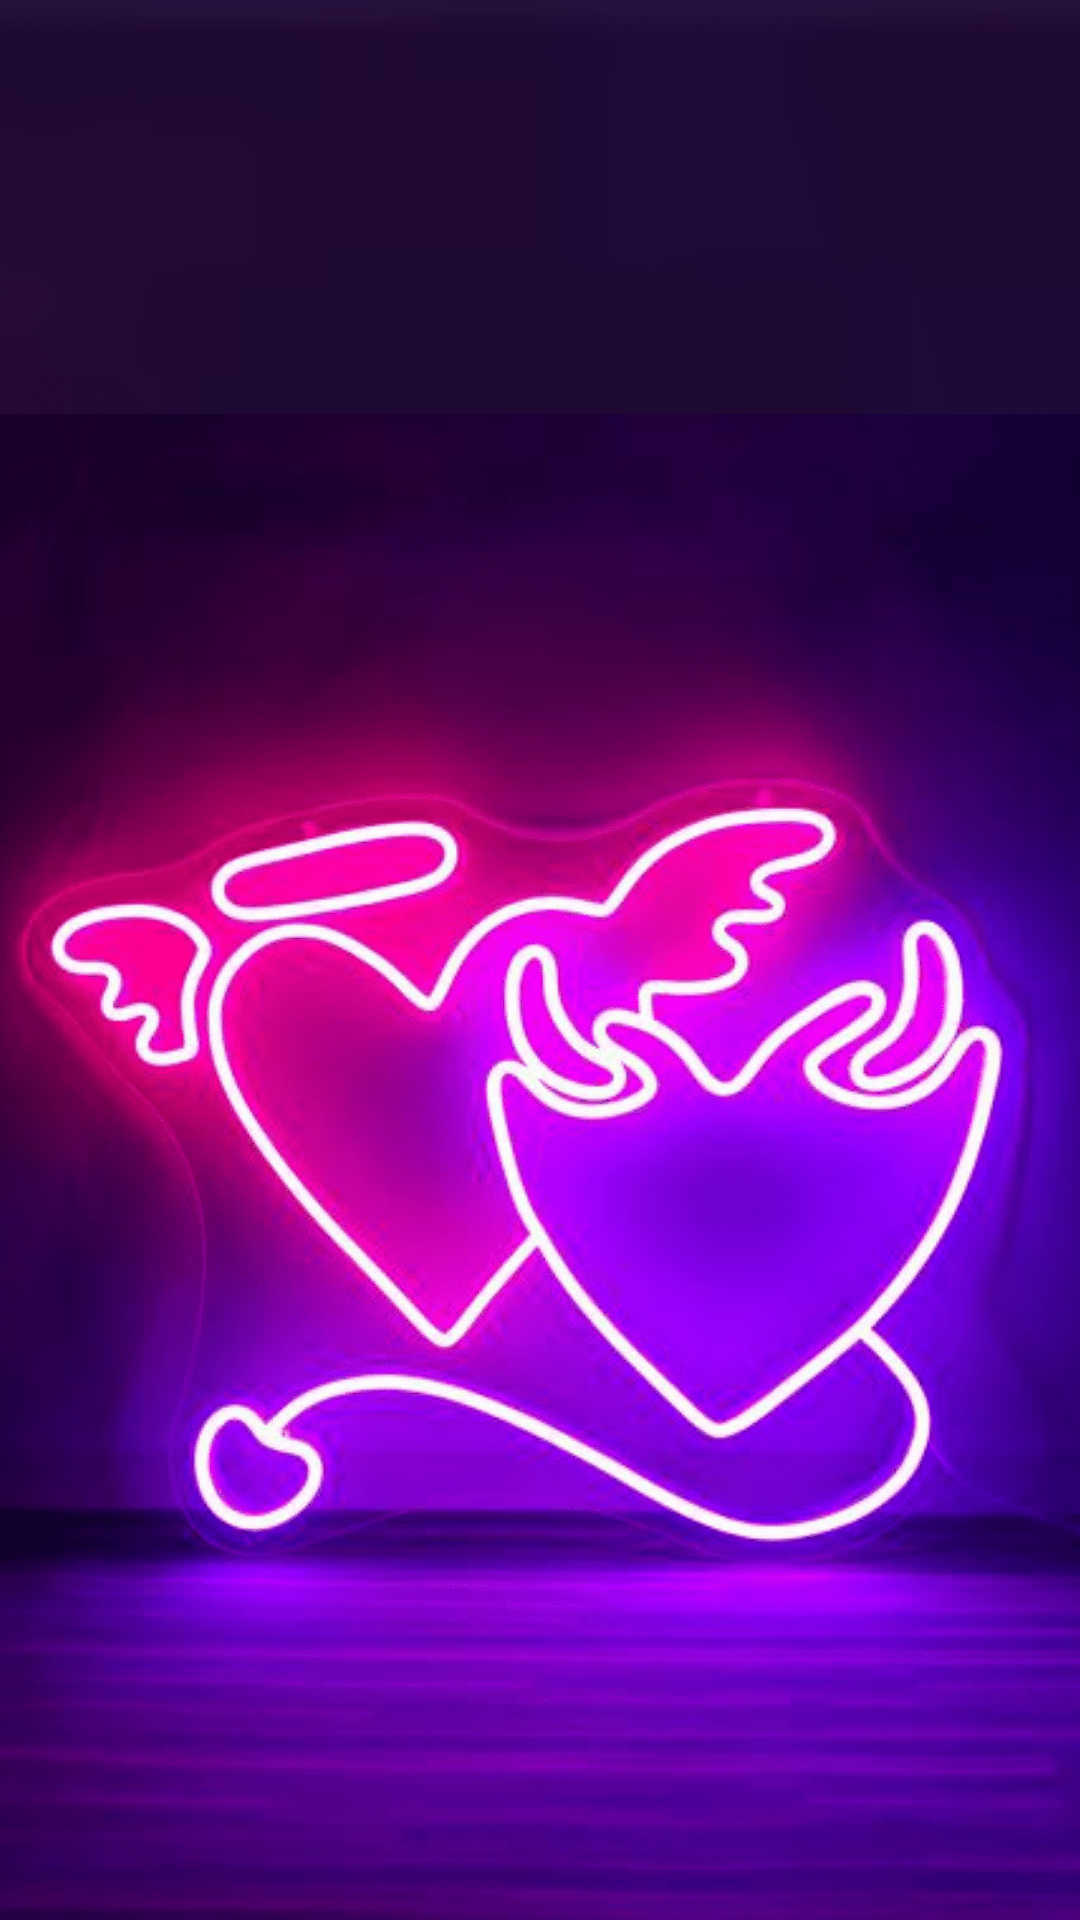 A neon sign with two hearts and an arrow - Baddie